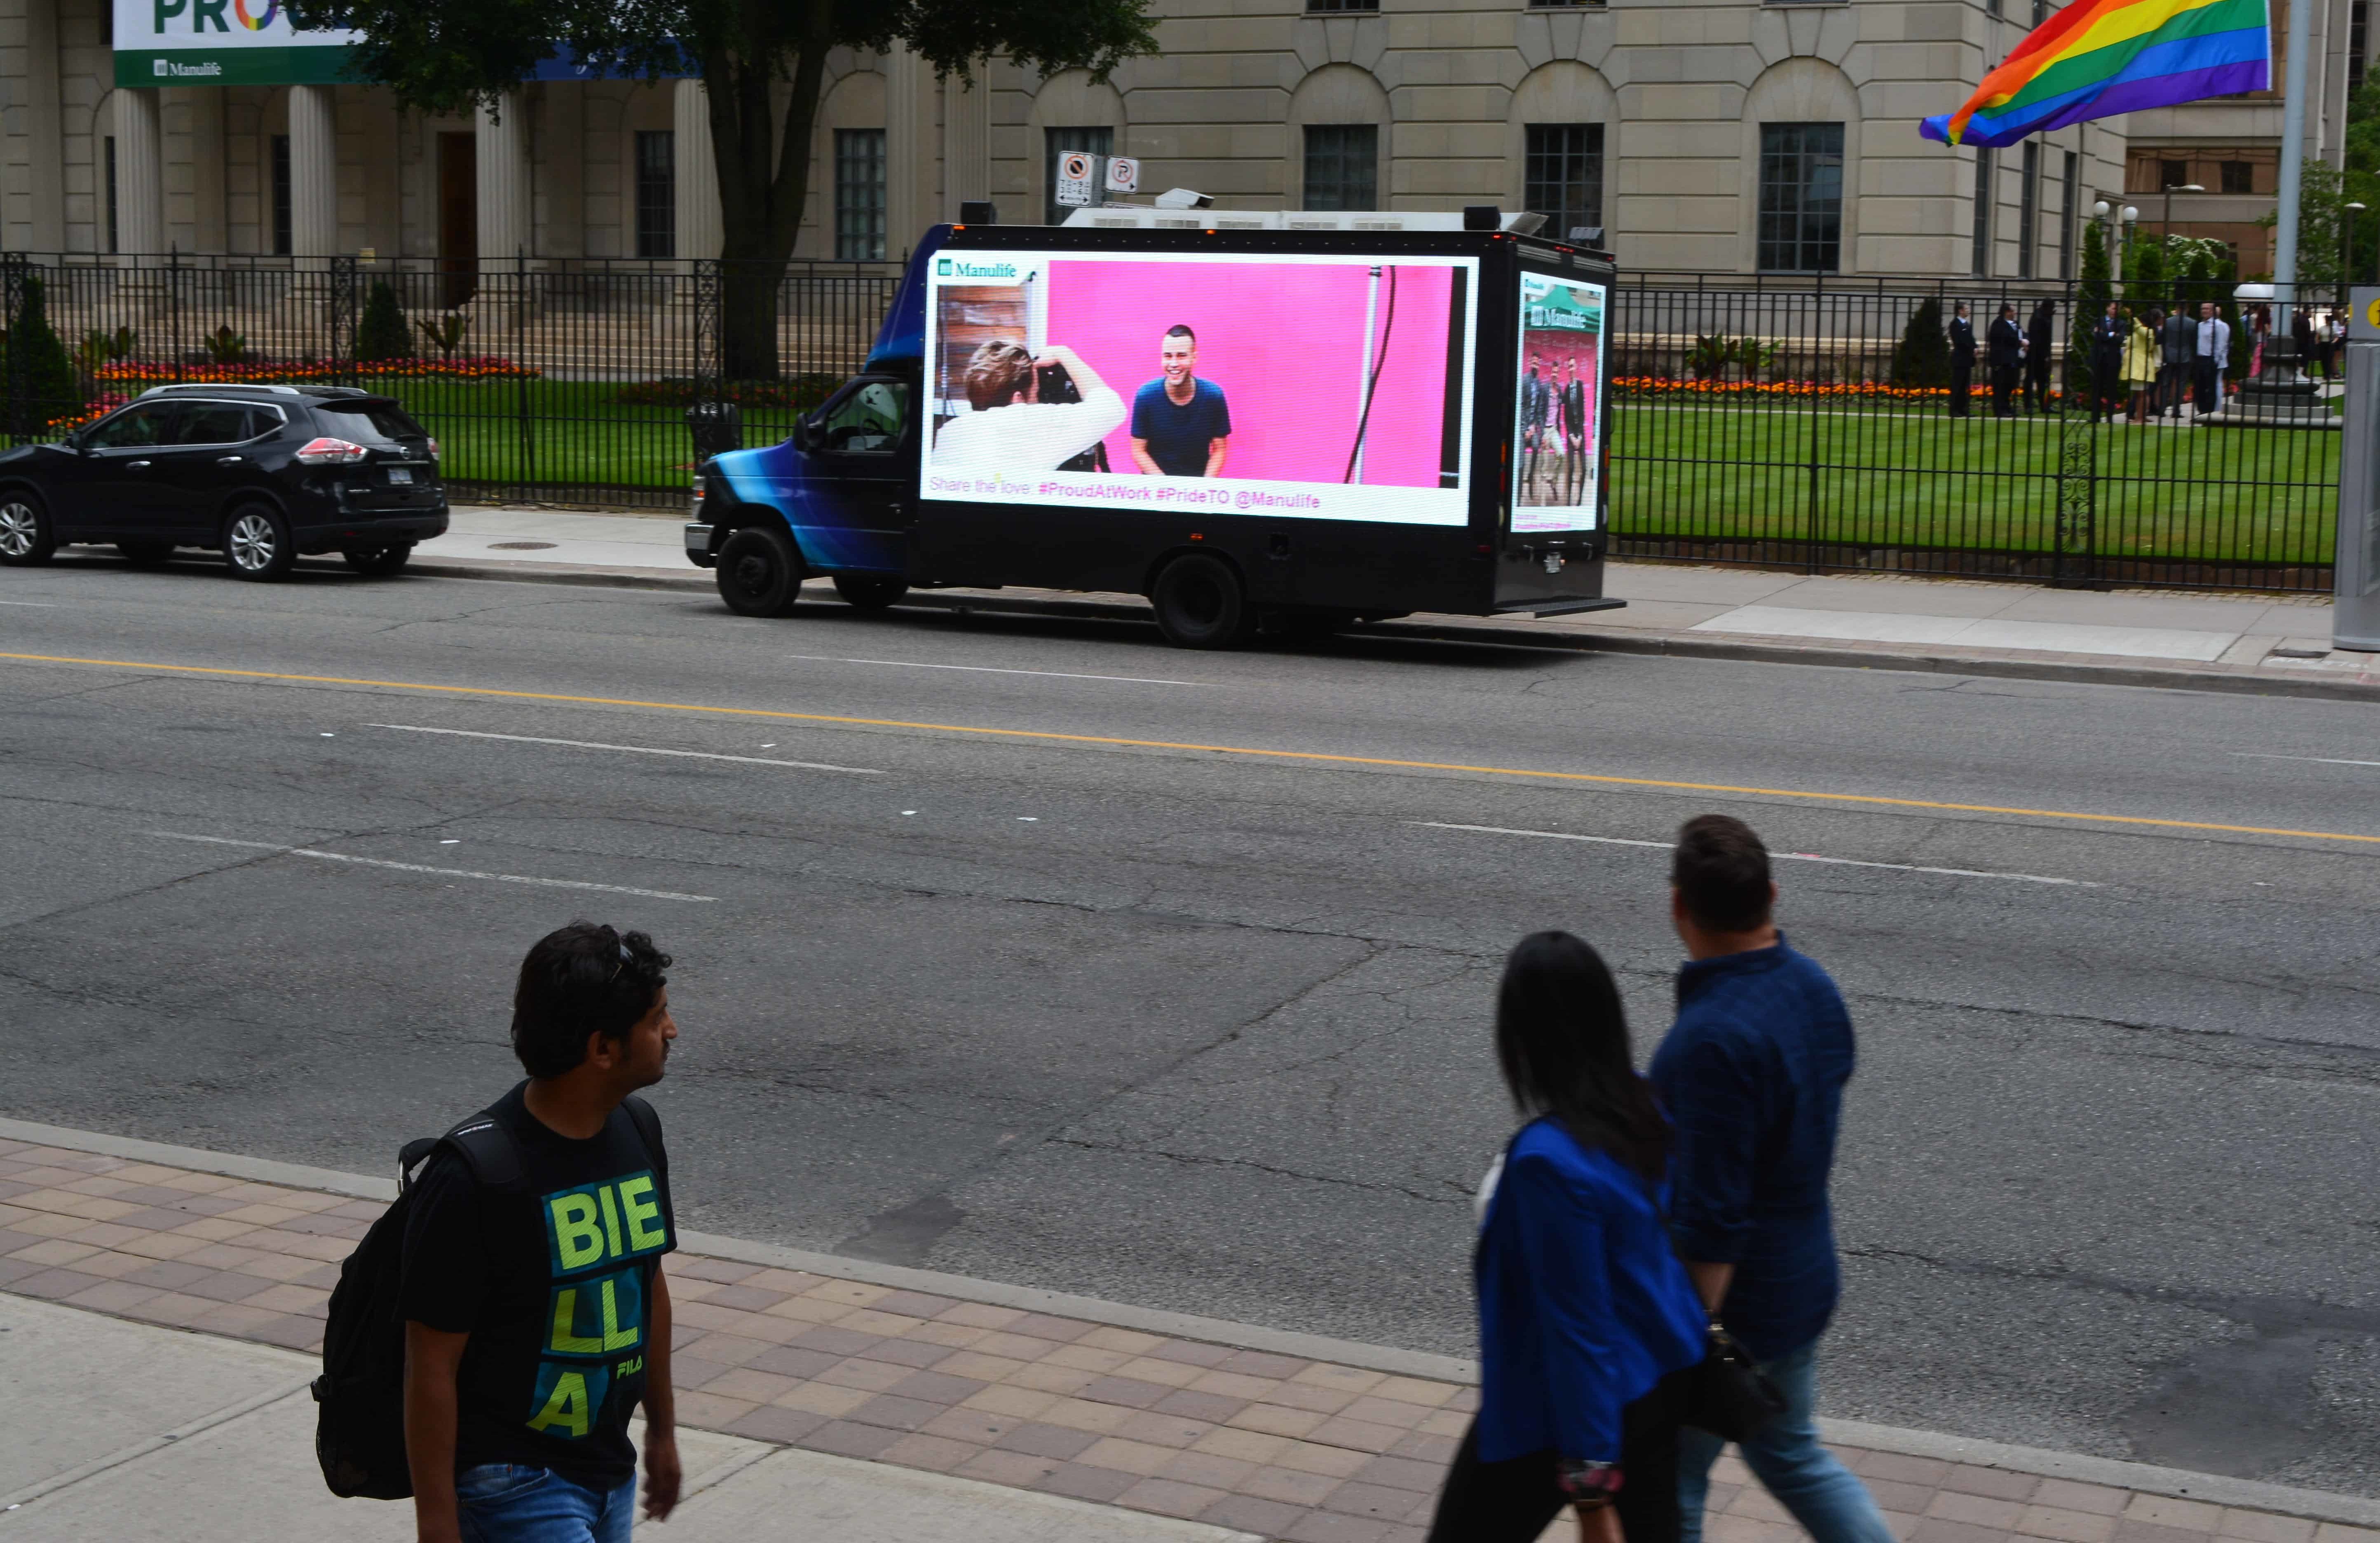 Led Billboard Trucks for Product promotions